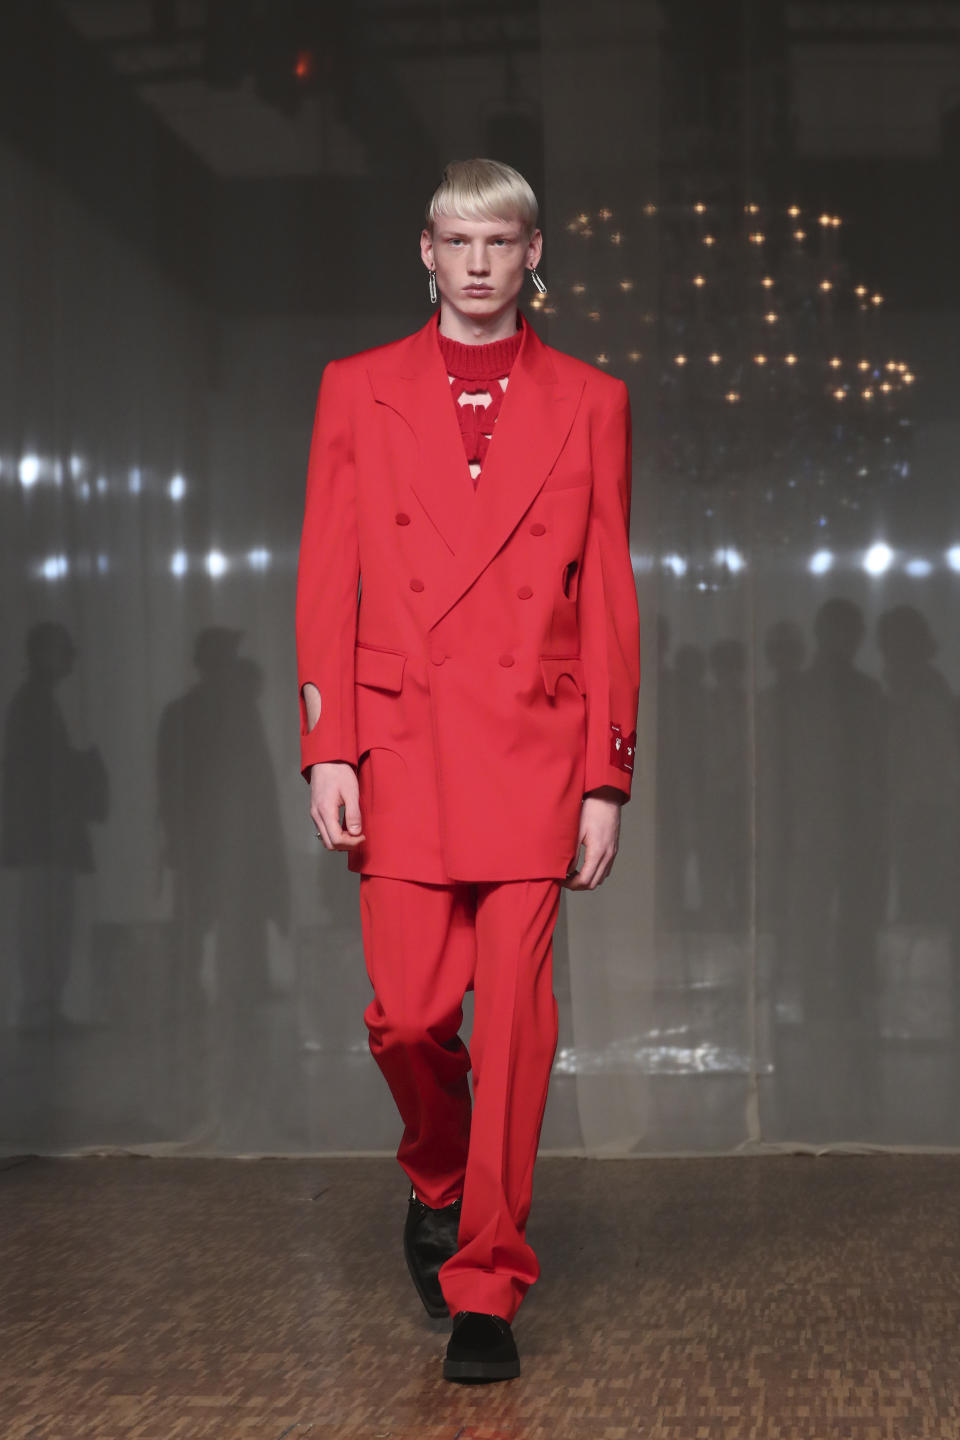 A model presents a creation for Off White Men's Fall/Winter 2019-2020 fashion collection presented in Paris, Wednesday Jan. 15, 2020. (AP Photo/Thibault Camus)